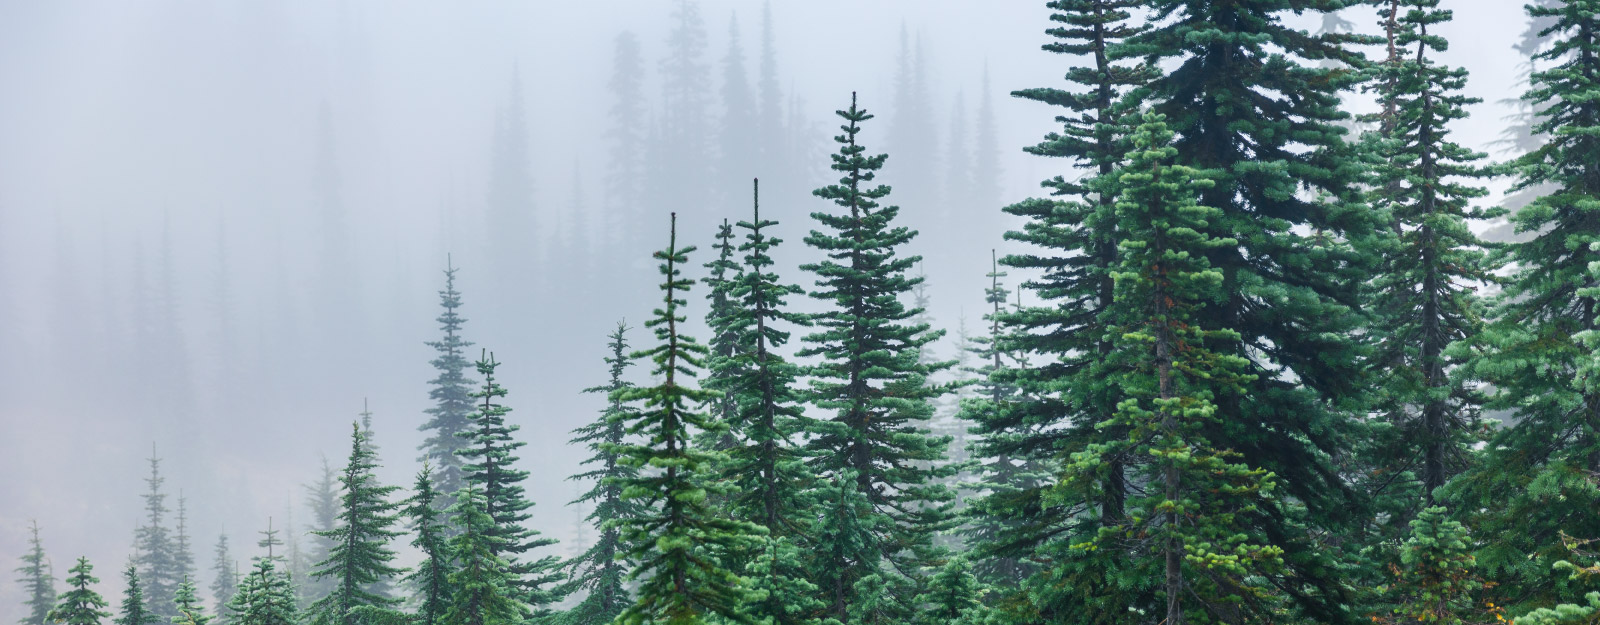 Evergreen trees in forrest